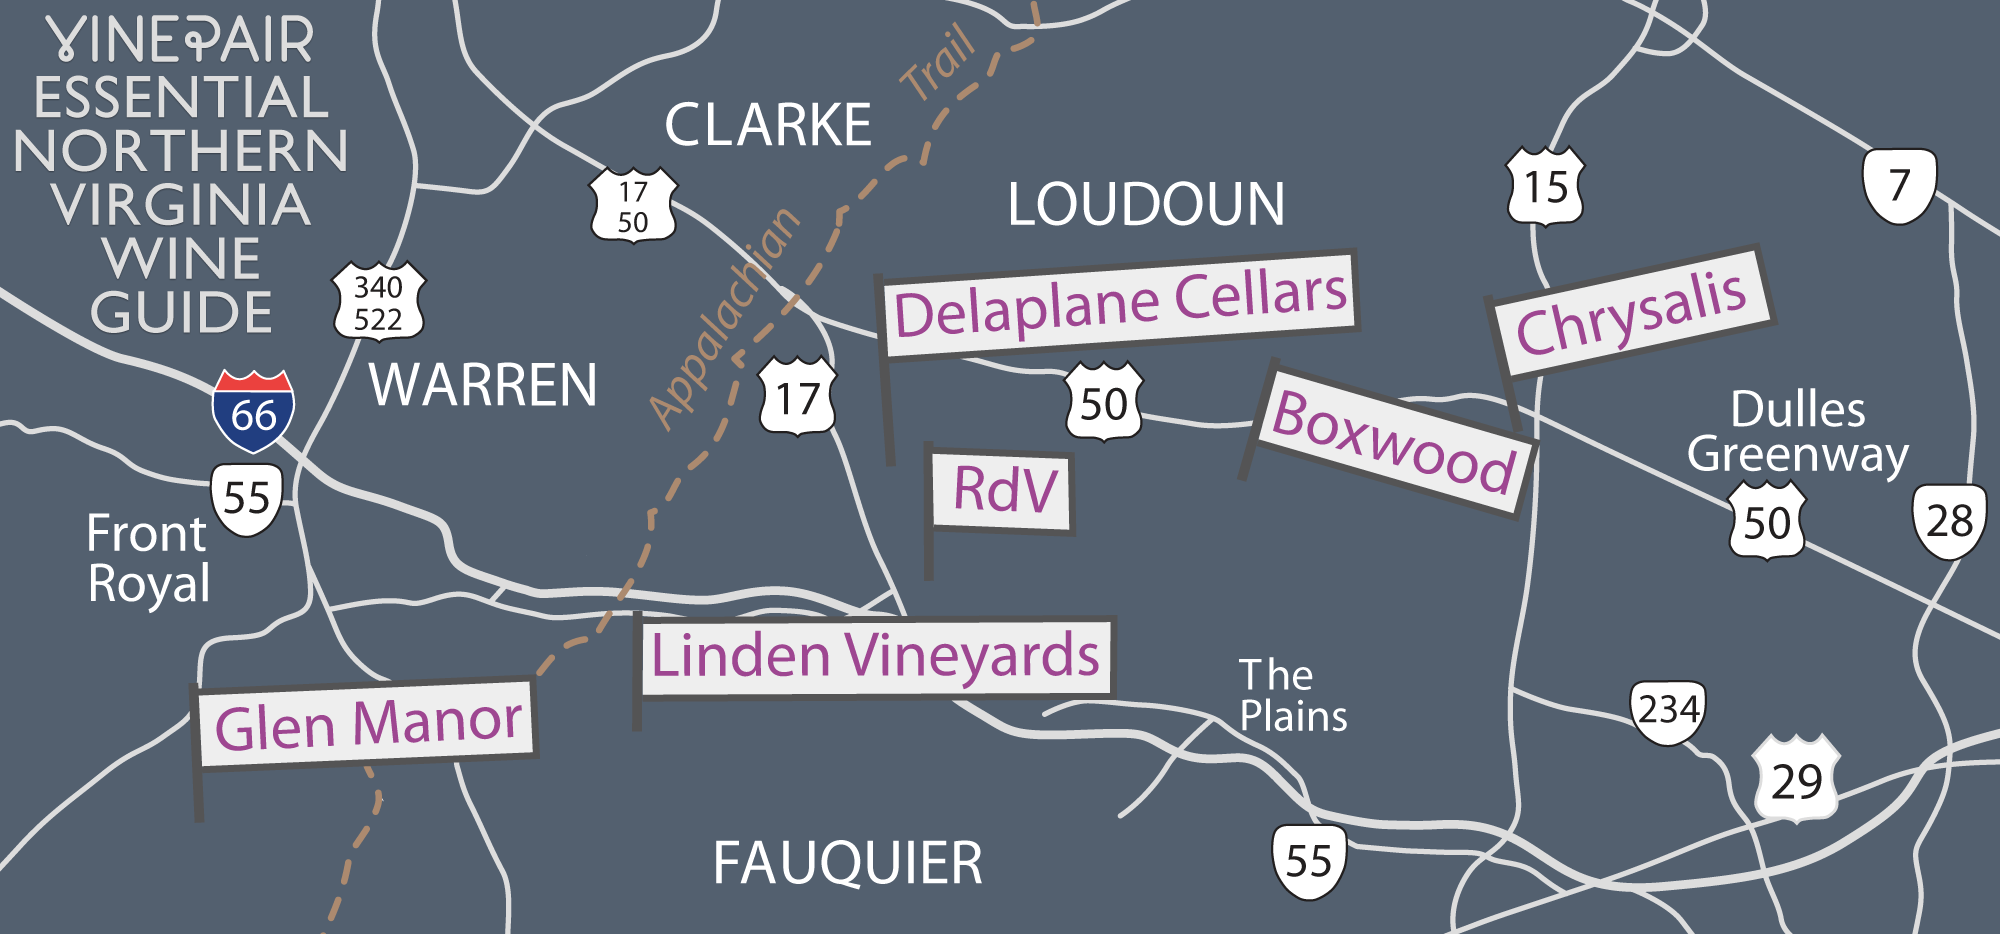 The Essential Guide To Northern Virginia Wine Country VinePair